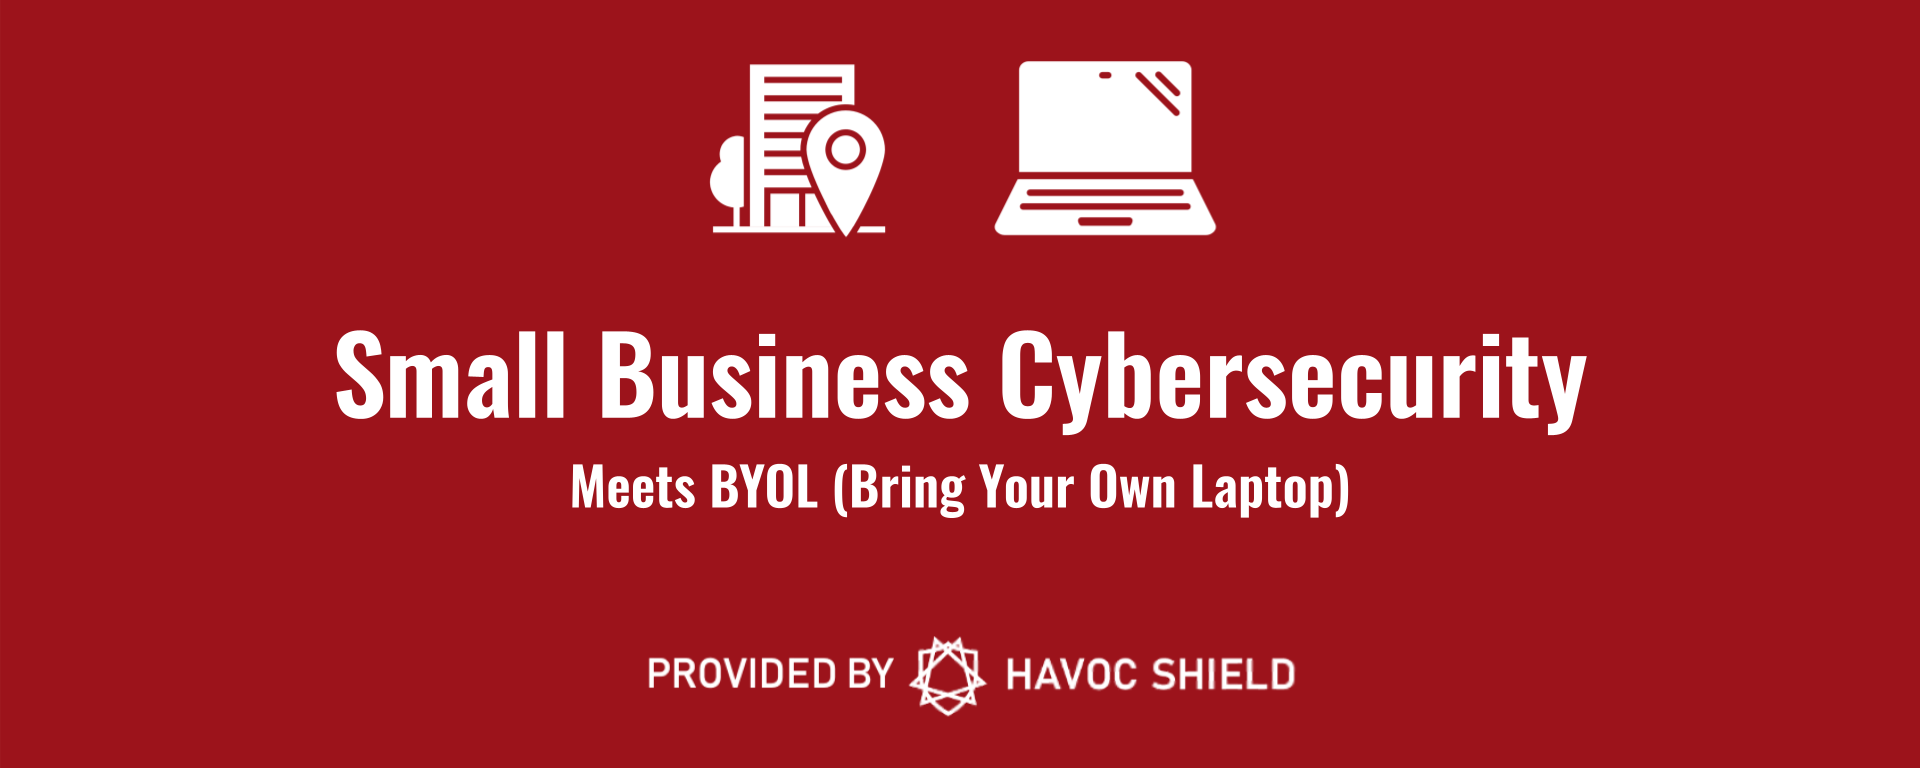 Small Business Cybersecurity Meets BYOL - Animated Infographic